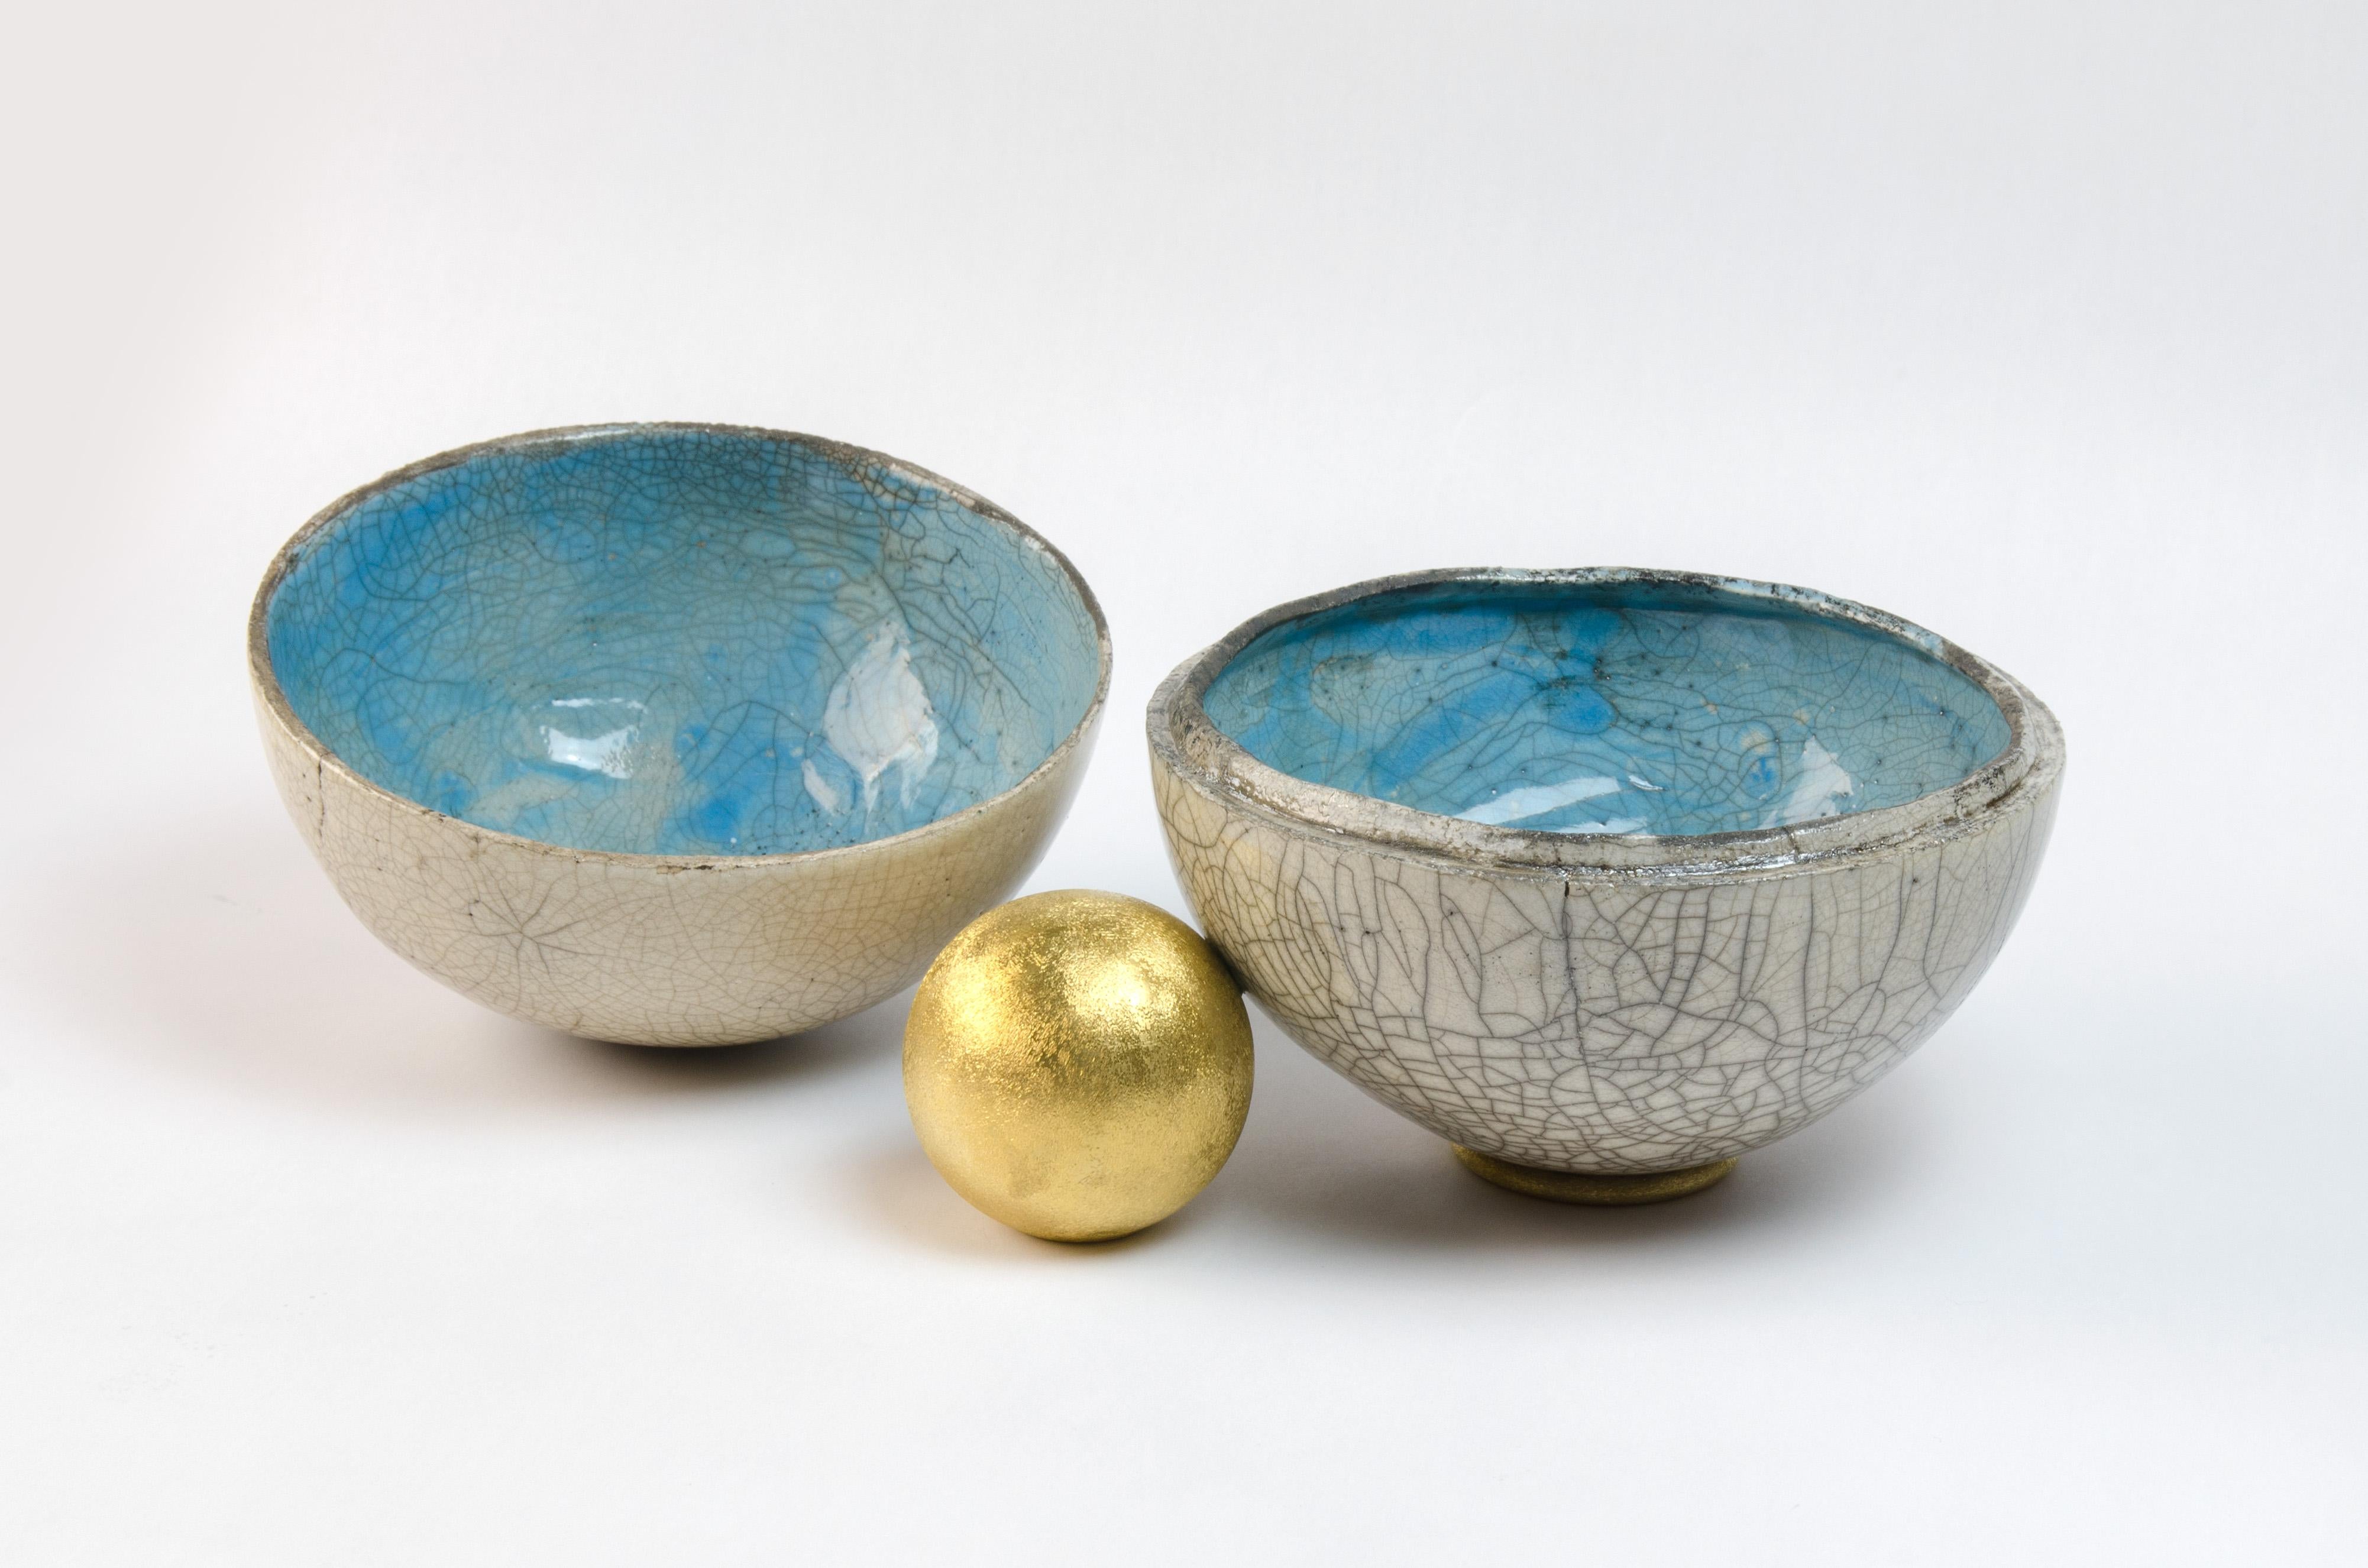 Aldus Collection: An accessory collection made in collaboration between Achille Salvagni and Fabio Gnessi 
Gaia
2018
Spherical Raku box with 24-carat gold-plated, cast bronze decoration with internal blue ceramic glazing. Gaia is made with the